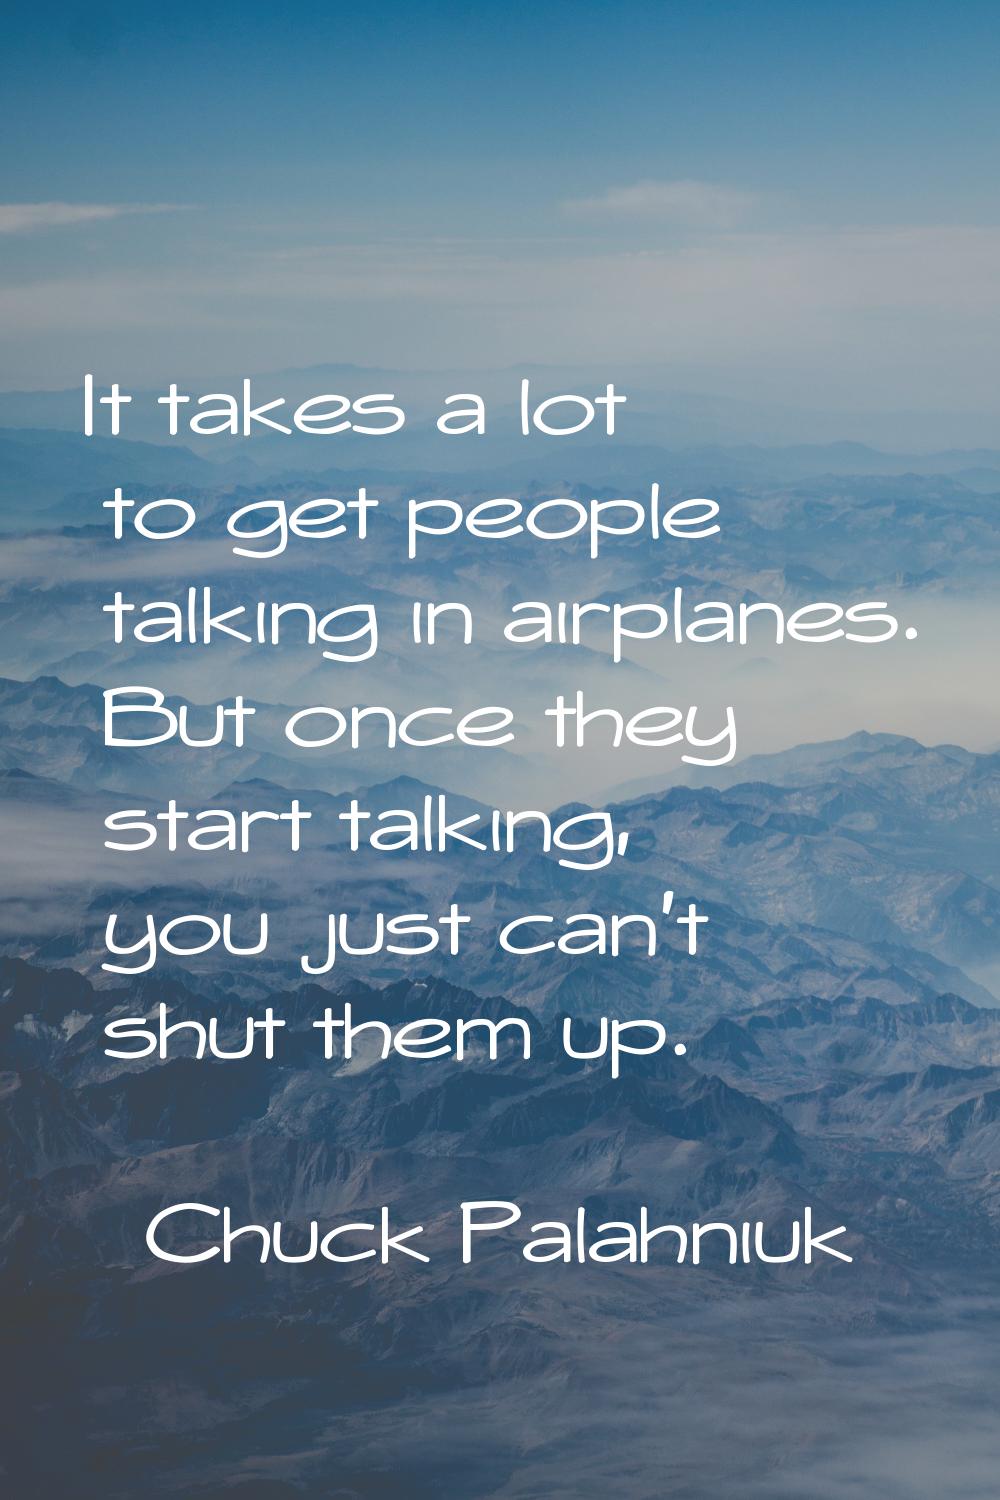 It takes a lot to get people talking in airplanes. But once they start talking, you just can't shut